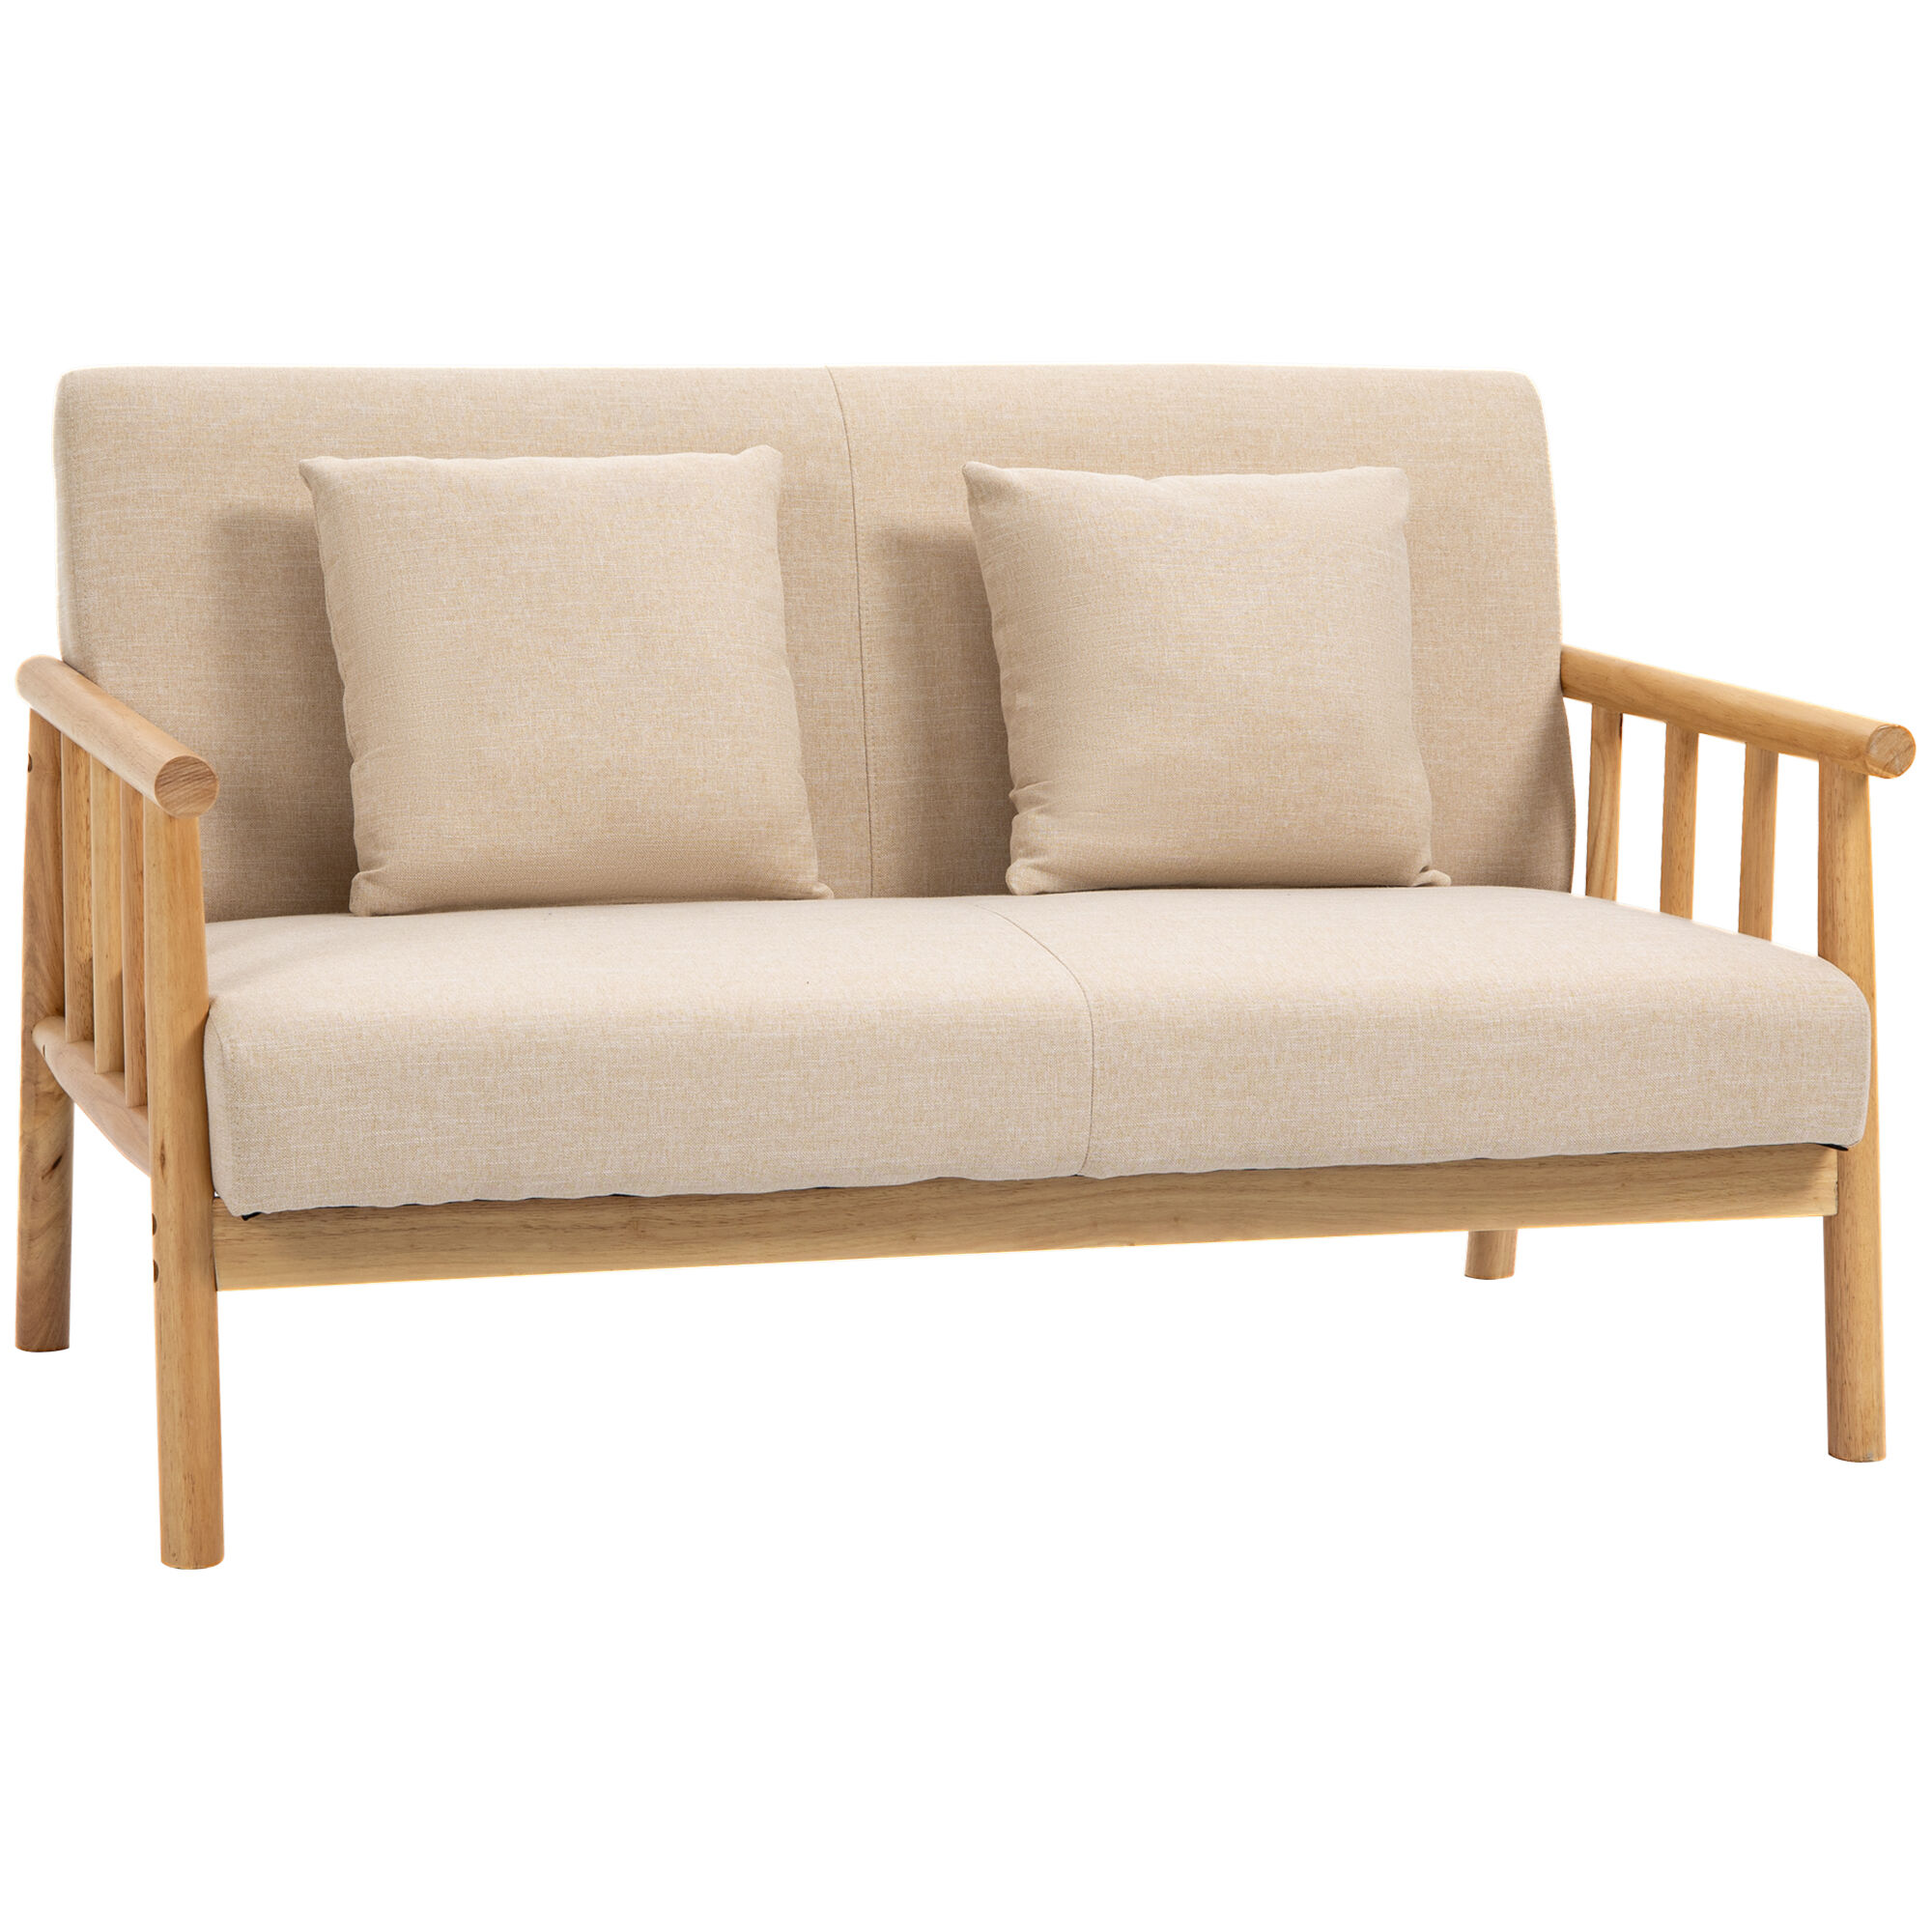 HOMCOM Loveseat Sofa 48" 2-Seater with Pillows Upholstered Small Couch for Spaces Beige   Aosom.com